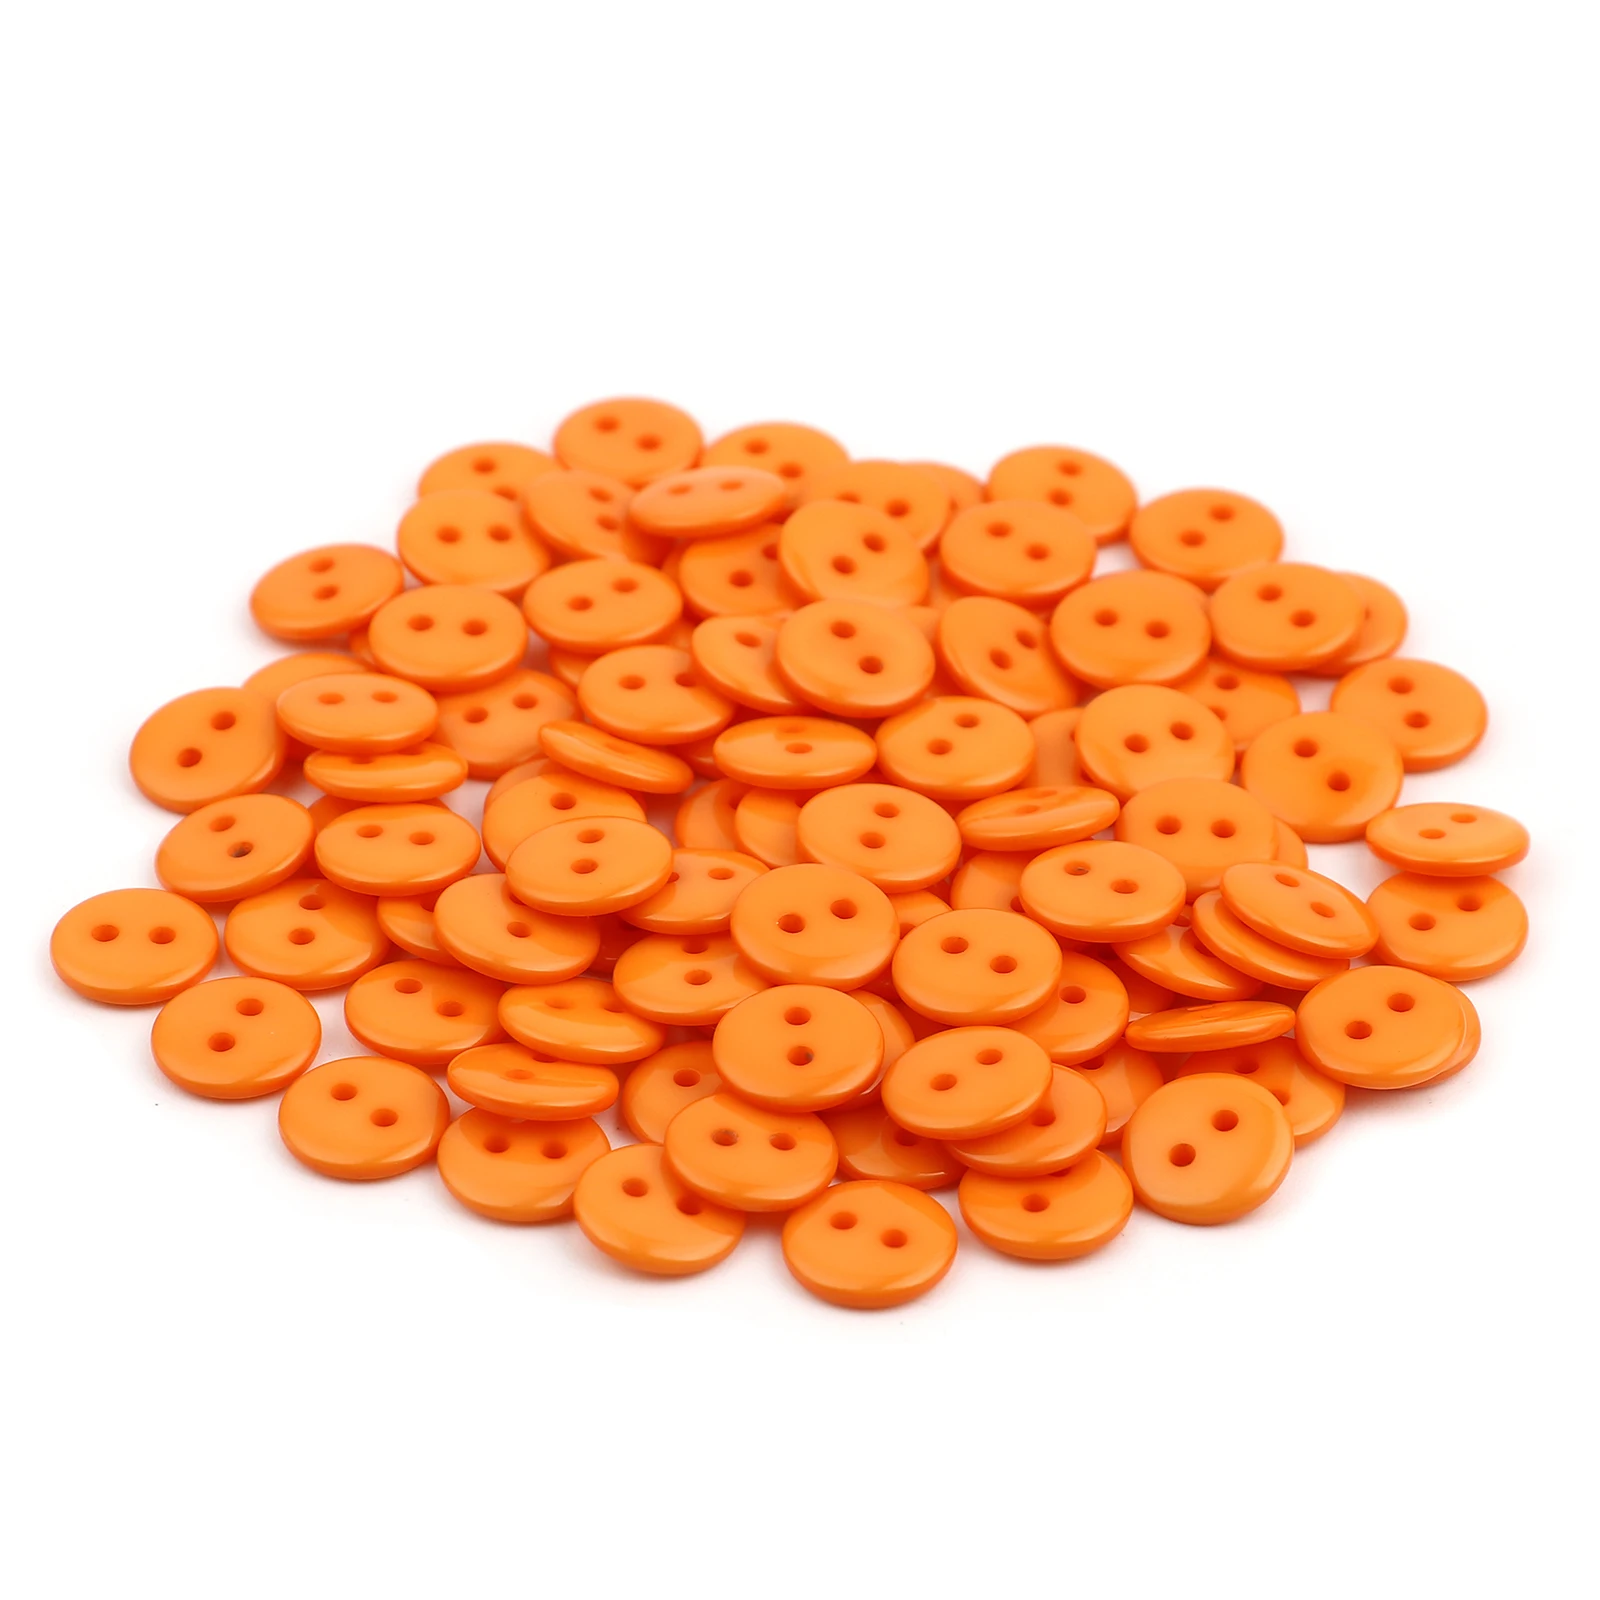 100 PCs Resin Sewing Buttons Scrapbooking Round 2 Holes Colorful Button For Scrapbooking Apparel Crafts DIY Decoration 10mm